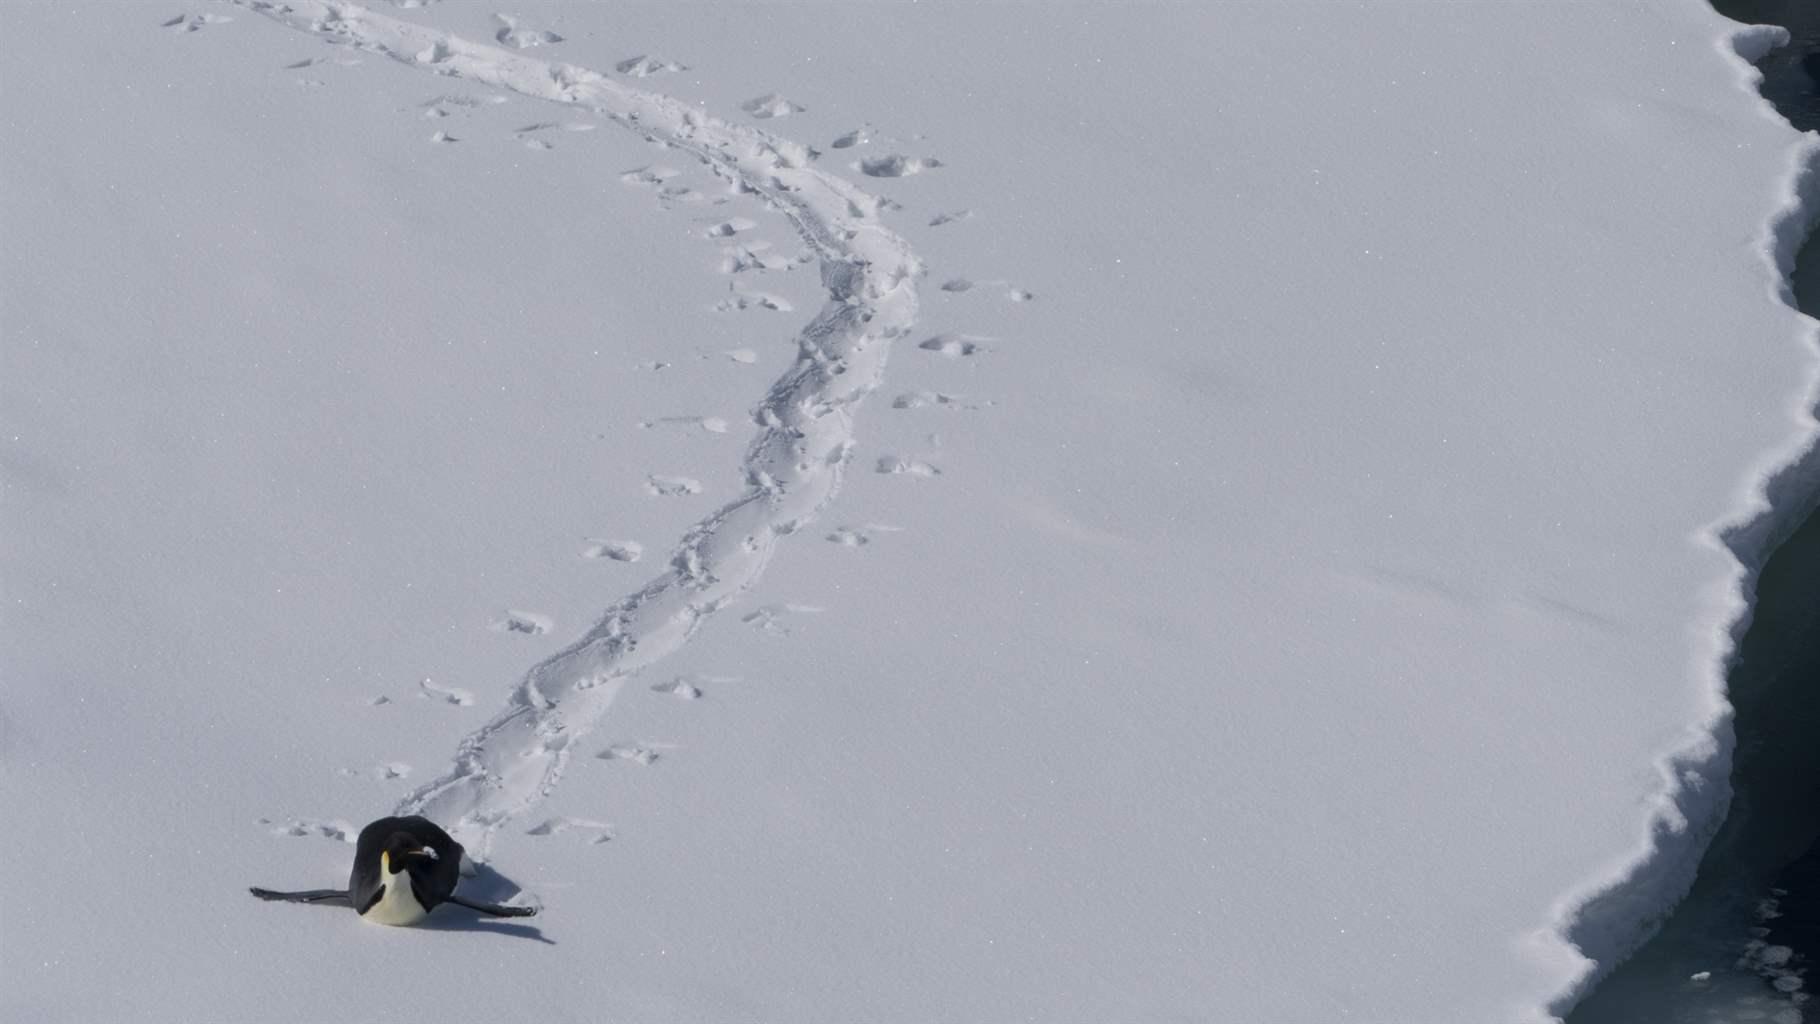 A penguin slides on its belly across a flat snowy plain, carving a path in the snow behind it.